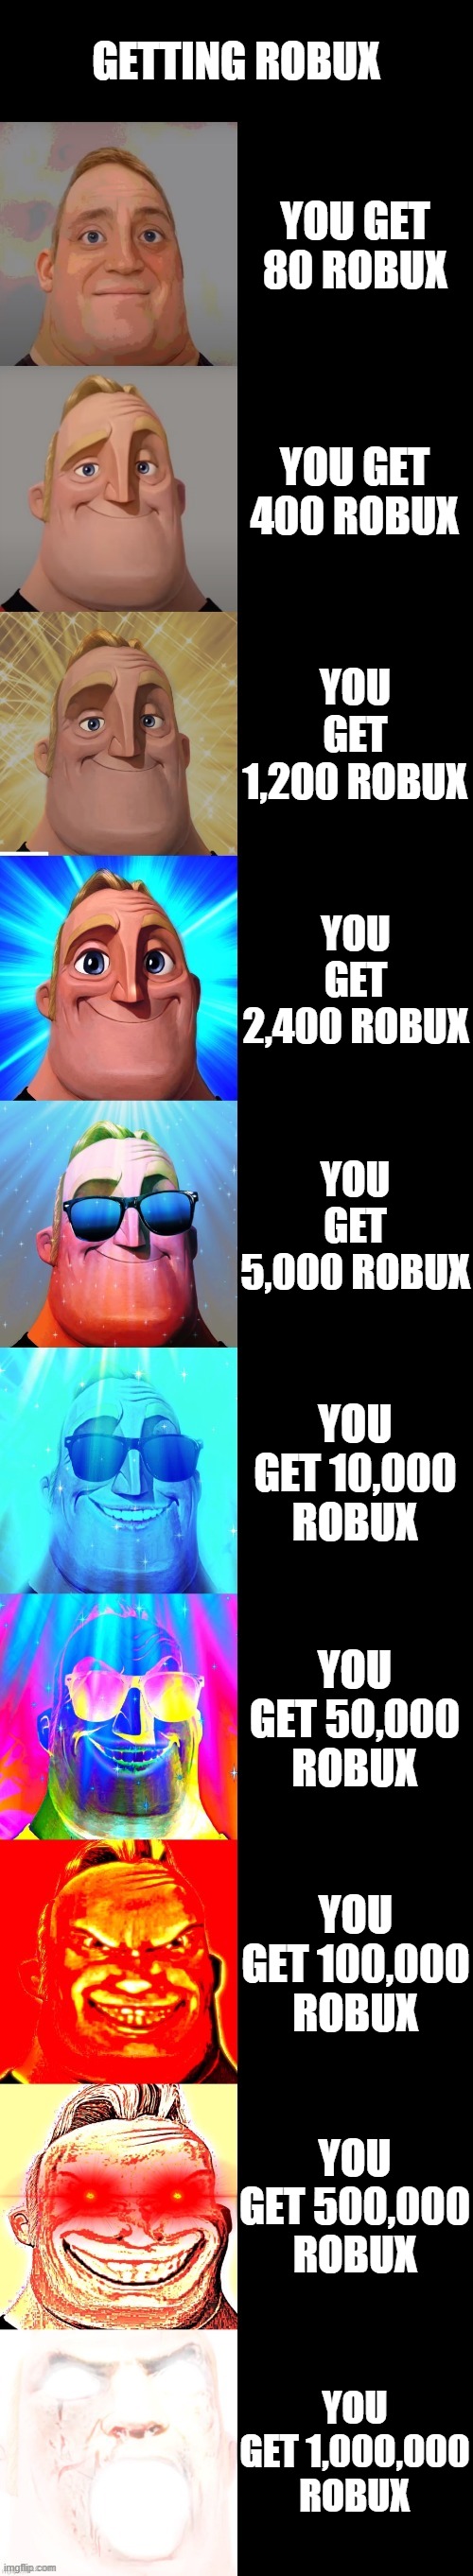 getting robux be like | GETTING ROBUX; YOU GET 80 ROBUX; YOU GET 400 ROBUX; YOU GET 1,200 ROBUX; YOU GET 2,400 ROBUX; YOU GET 5,000 ROBUX; YOU GET 10,000 ROBUX; YOU GET 50,000 ROBUX; YOU GET 100,000 ROBUX; YOU GET 500,000 ROBUX; YOU GET 1,000,000 ROBUX | image tagged in mr incredible becoming canny | made w/ Imgflip meme maker